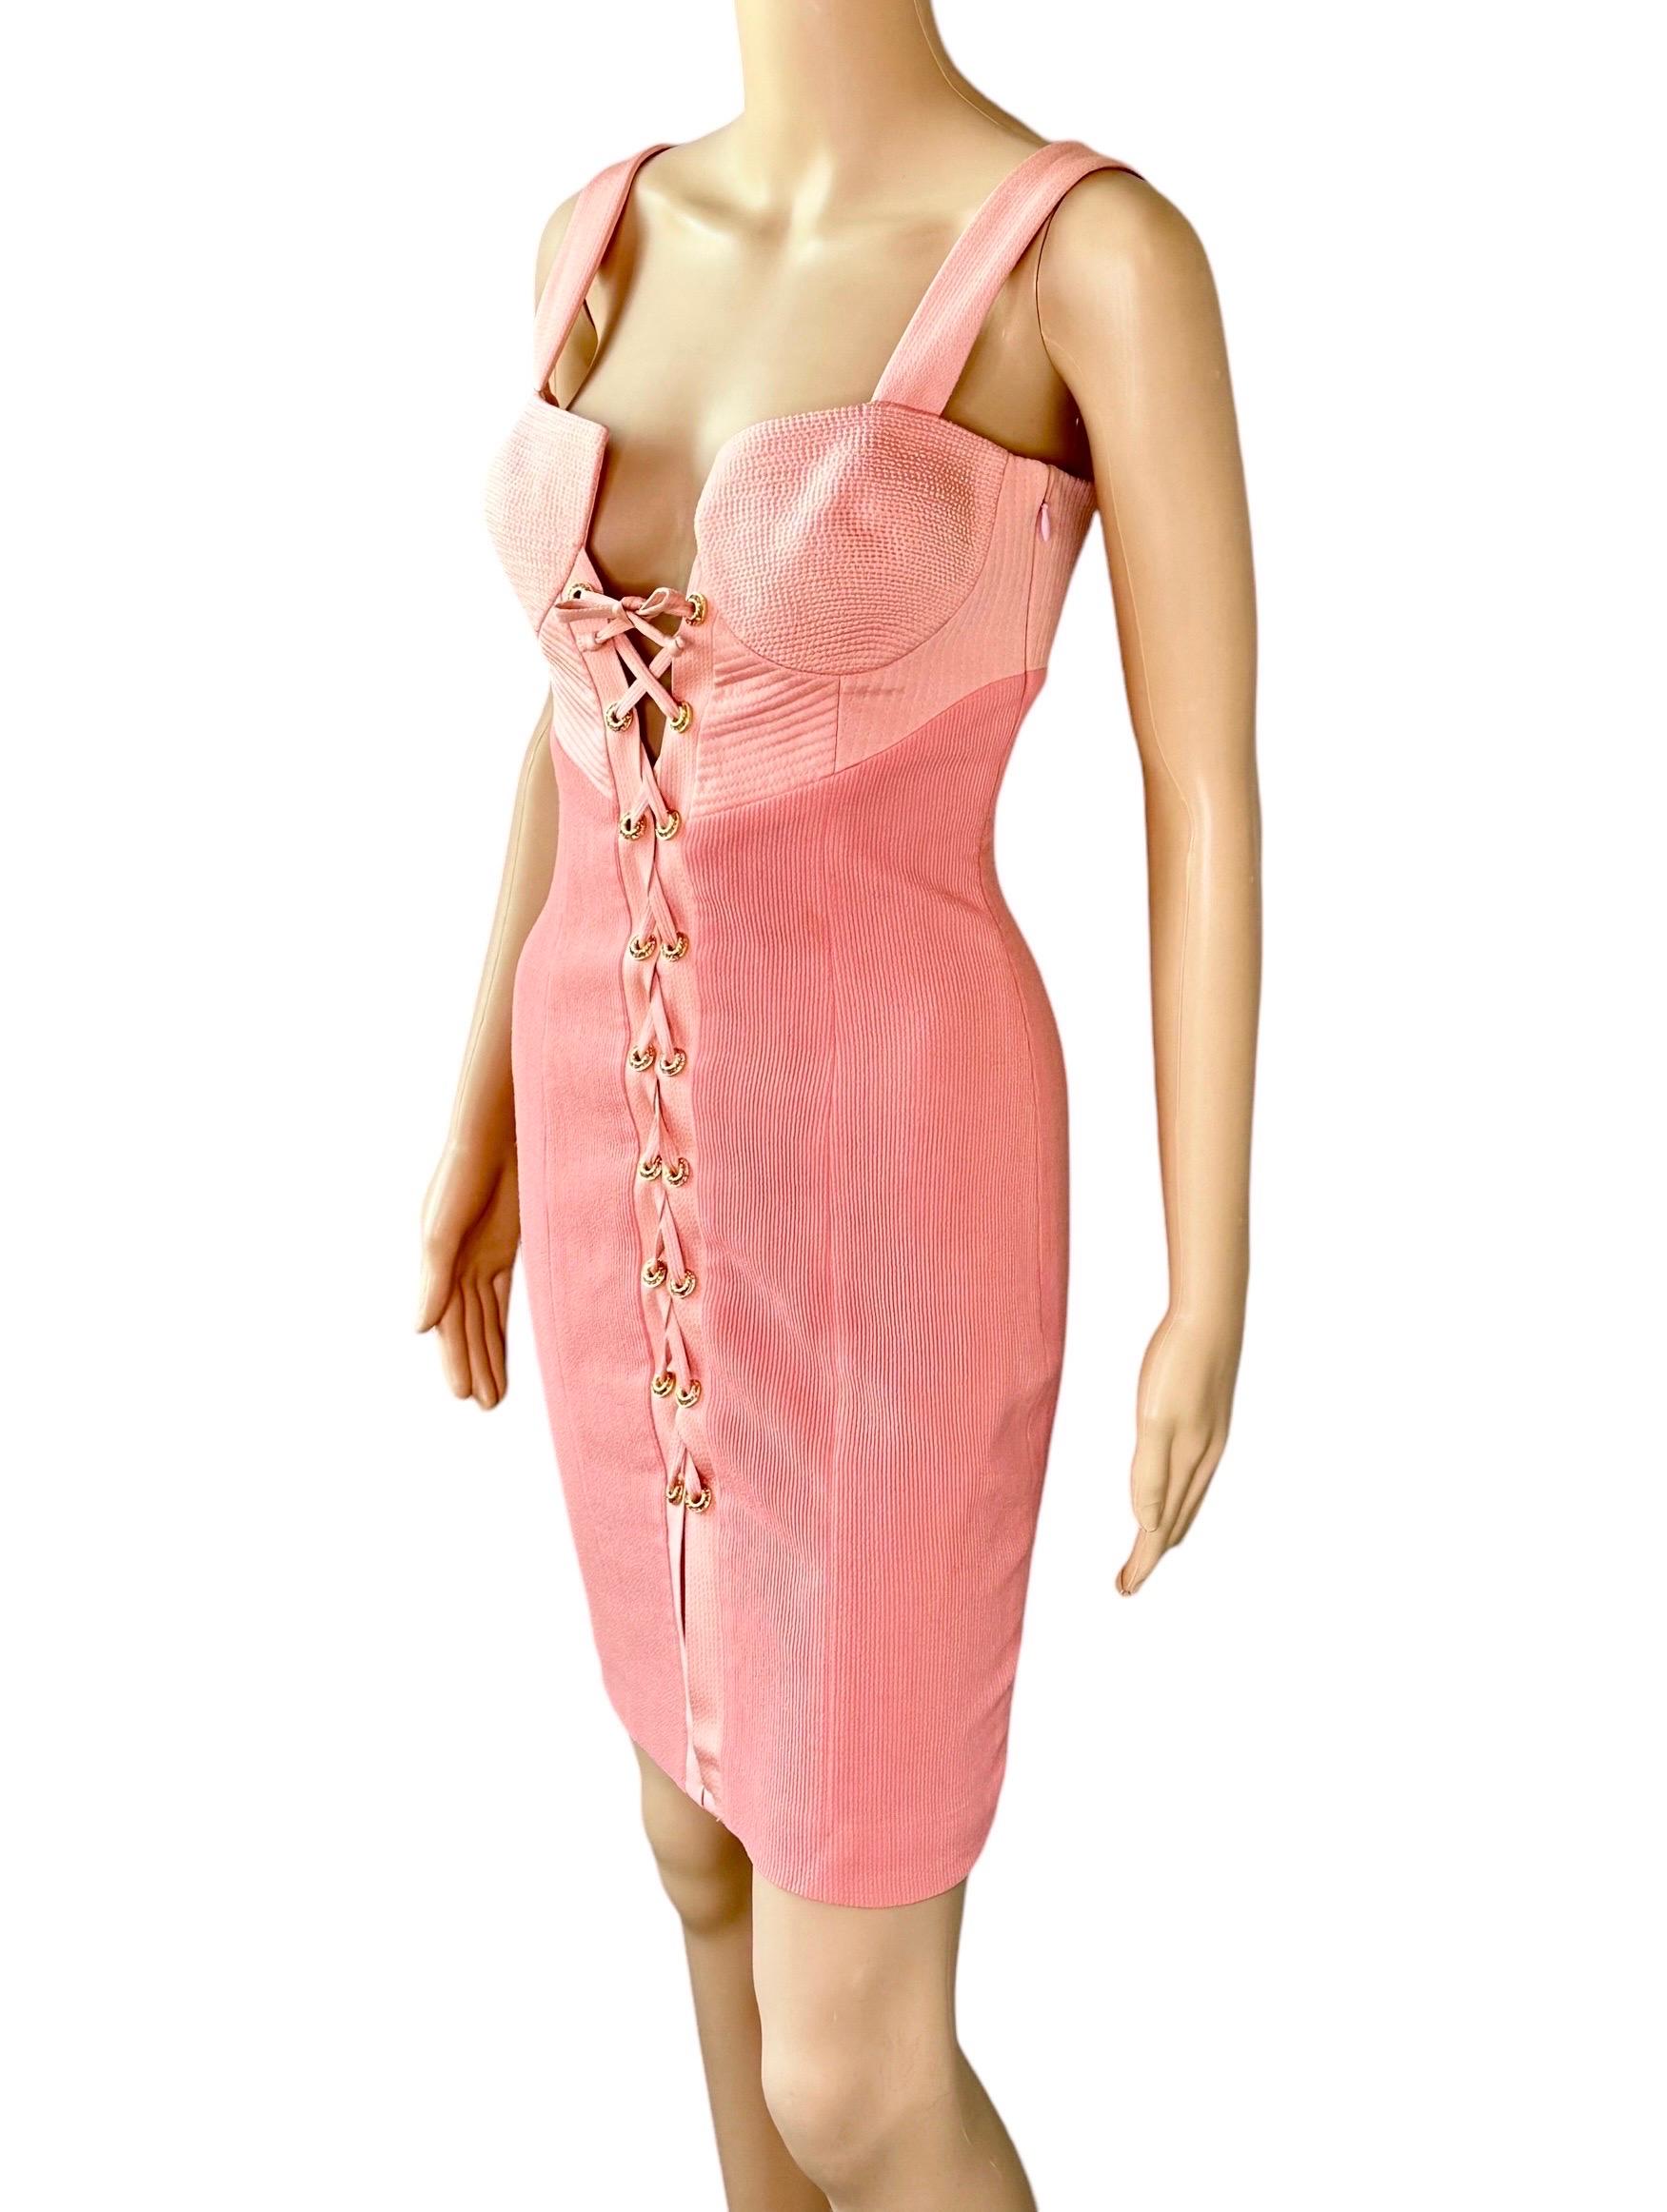 Gianni Versace S/S 1992 Couture Bustier Corset Lace Up Mini Dress For Sale 12